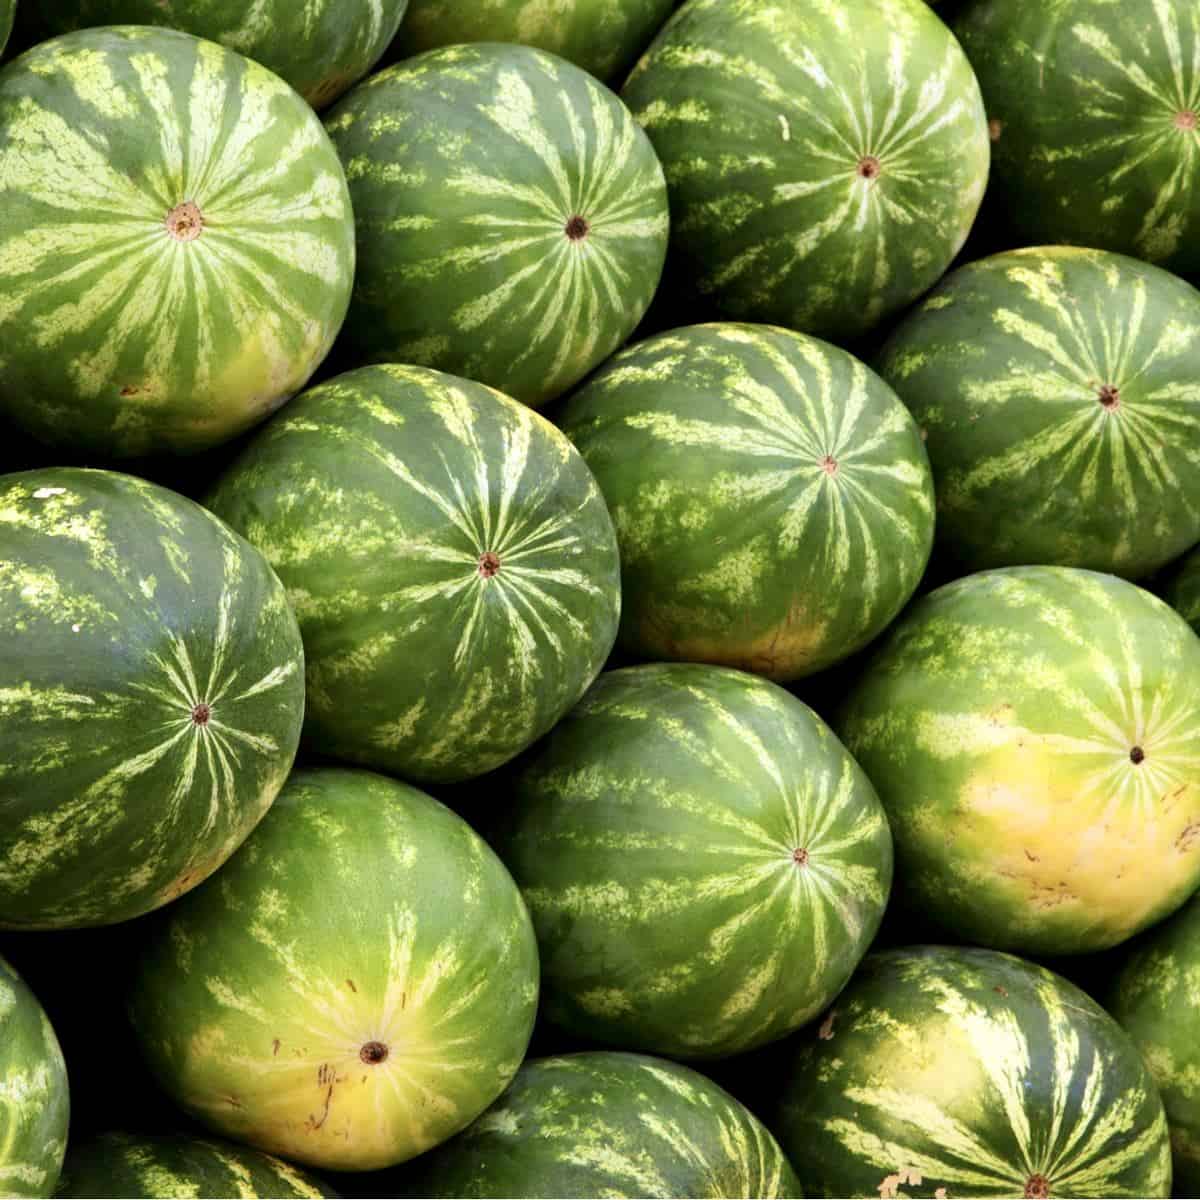 A stack of watermelons.